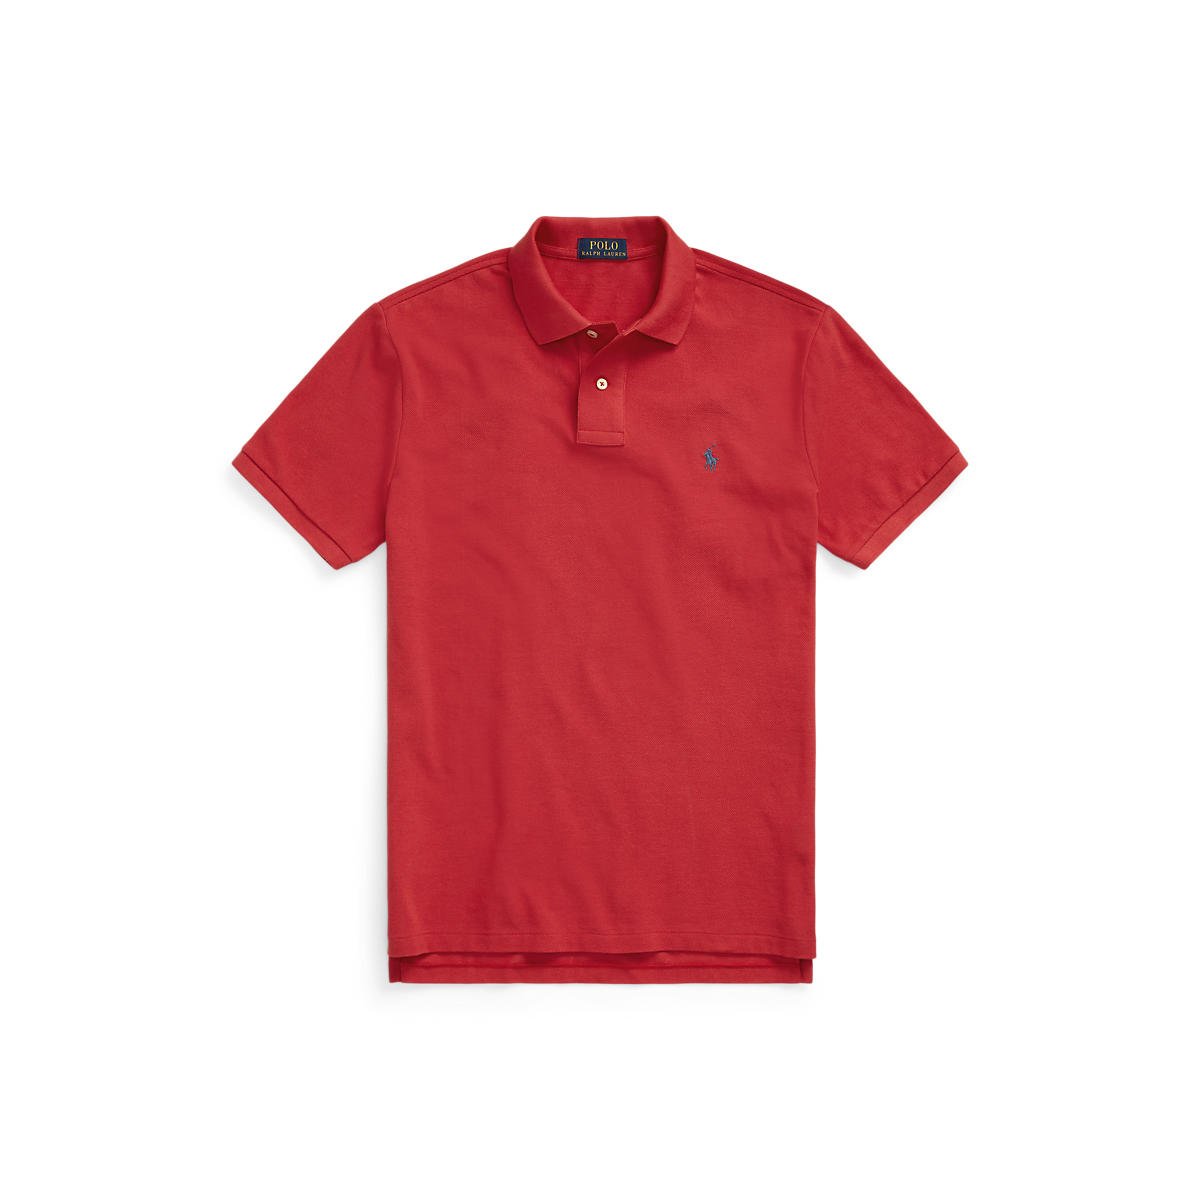 710536856333 Polo Ralph Lauren Slim Fit Mesh Polo Shirt Sunrise Red, P5,355 from P7,650.jpeg